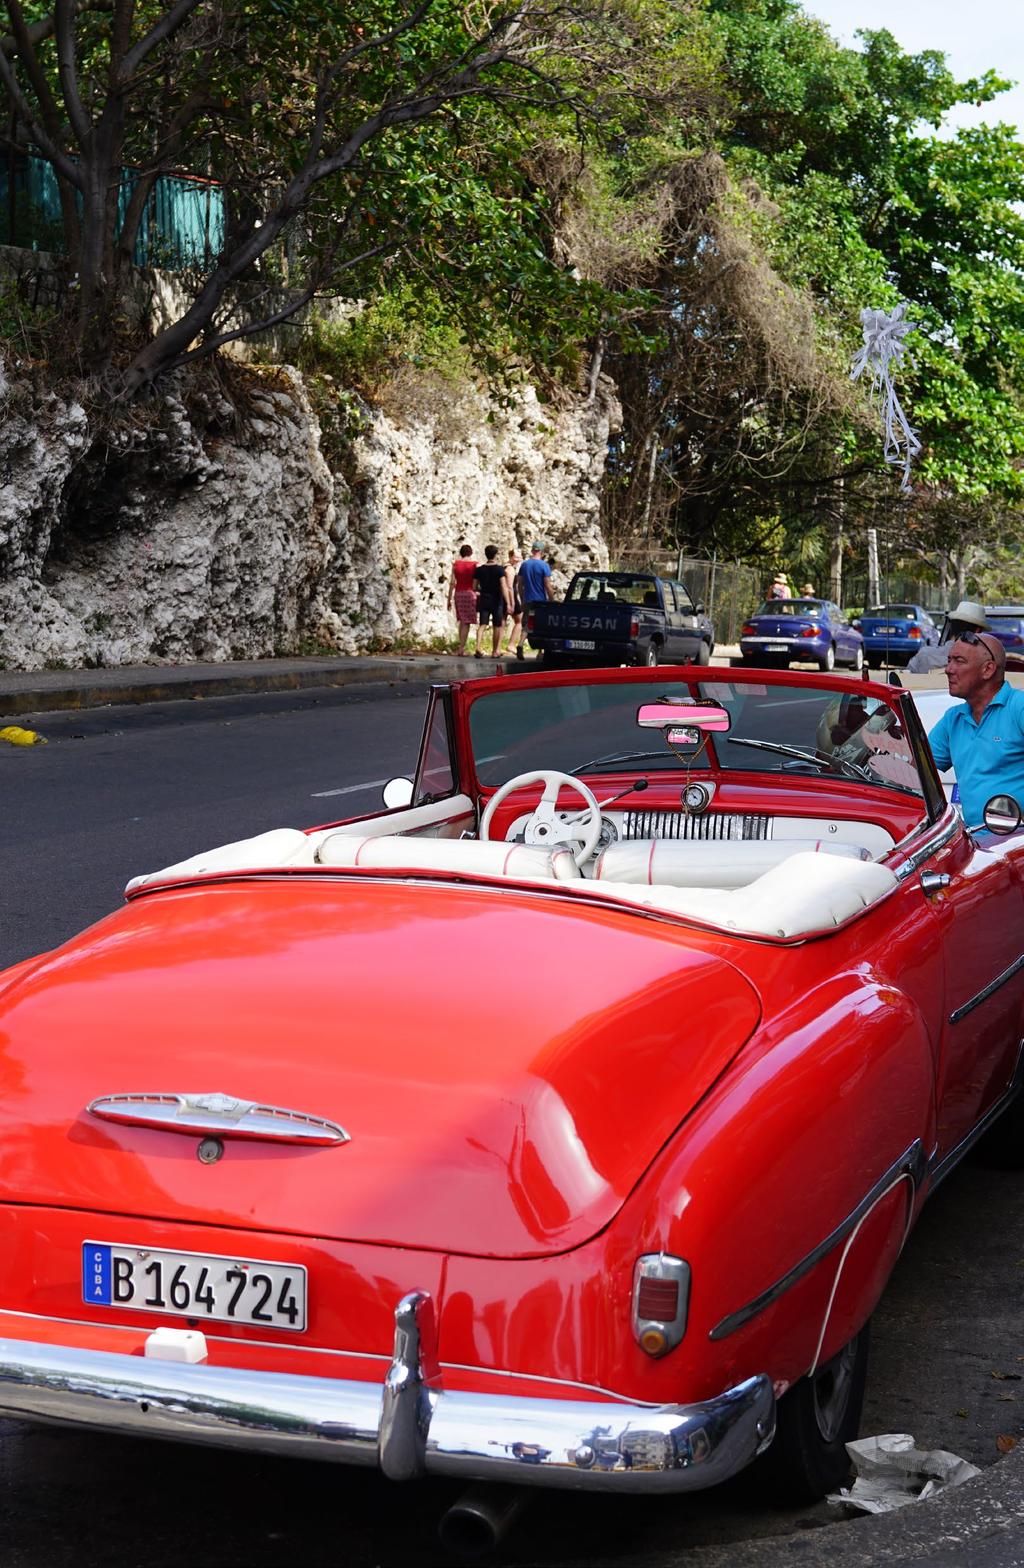 Itinerary Day One Arrive in Havana in the early afternoon, exchange some money with the help of your guide and then head to Old Havana to settle